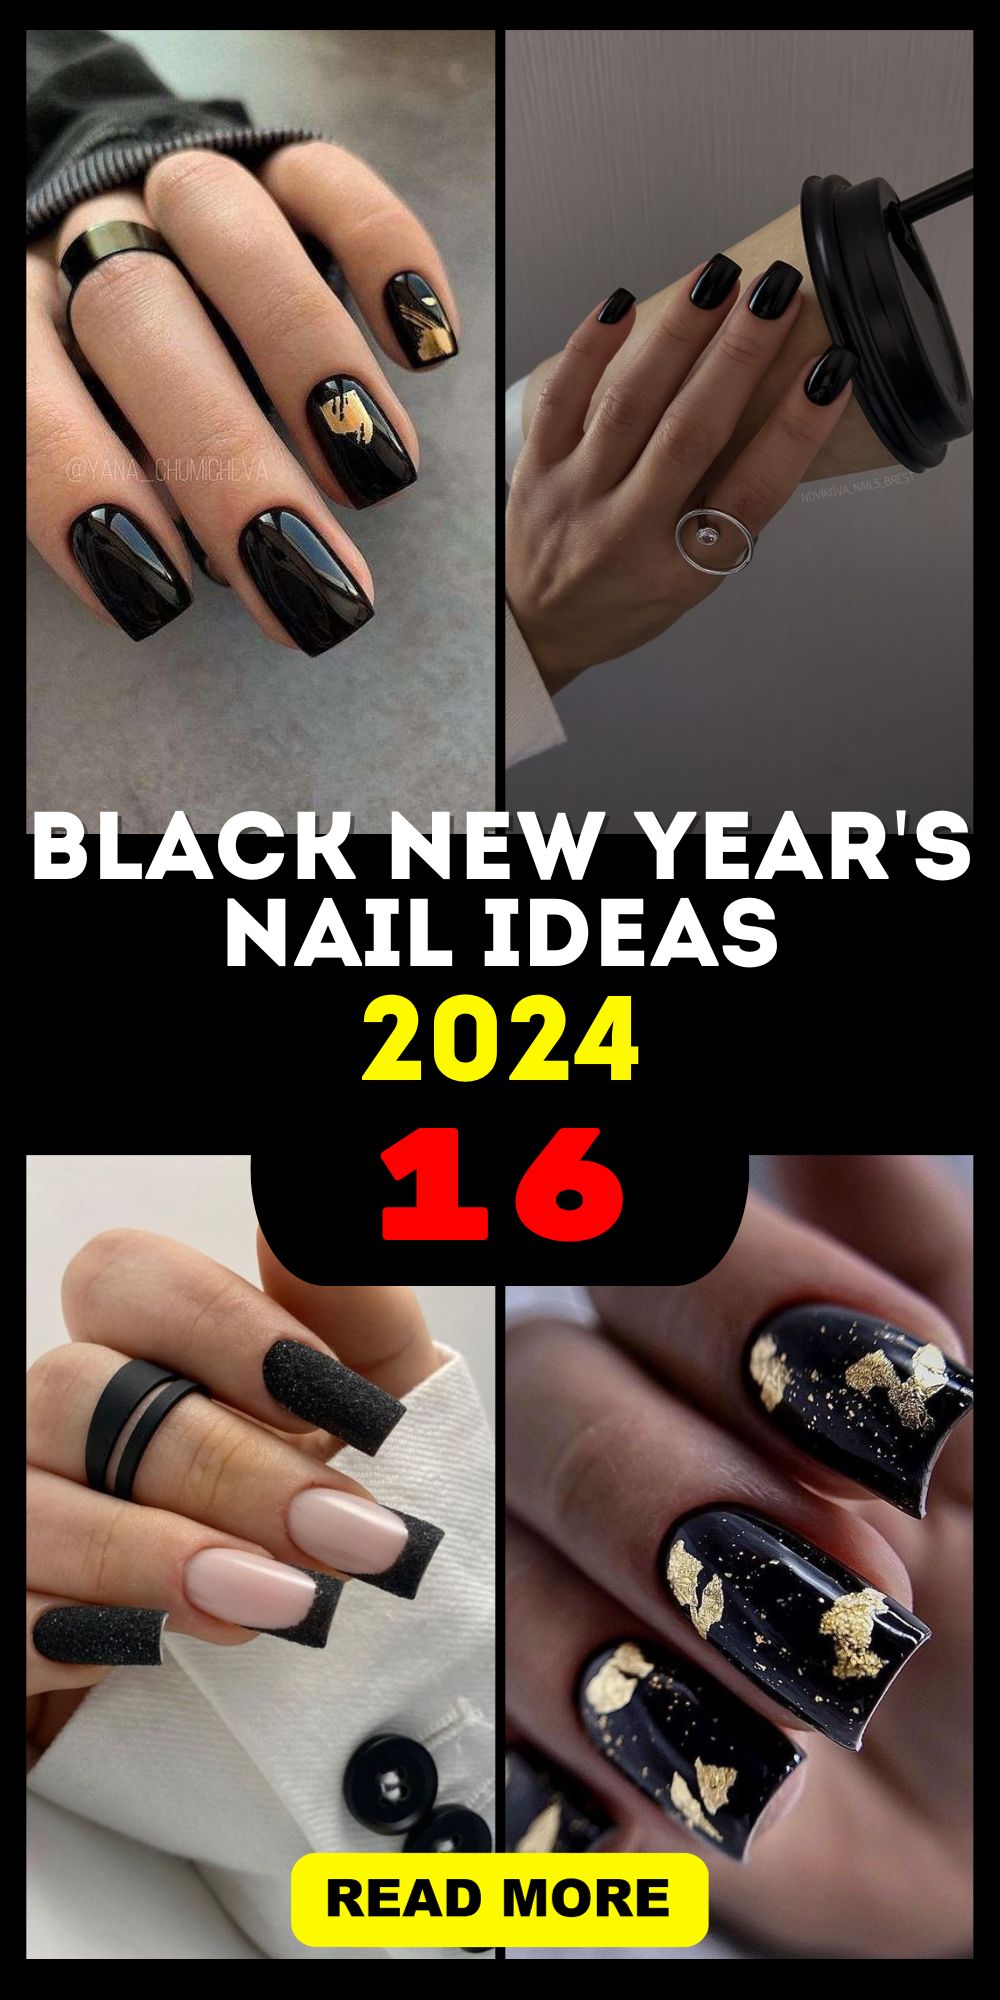 Chic 2024 Black New Year's Nail Ideas with Gold, Silver, and Glamour